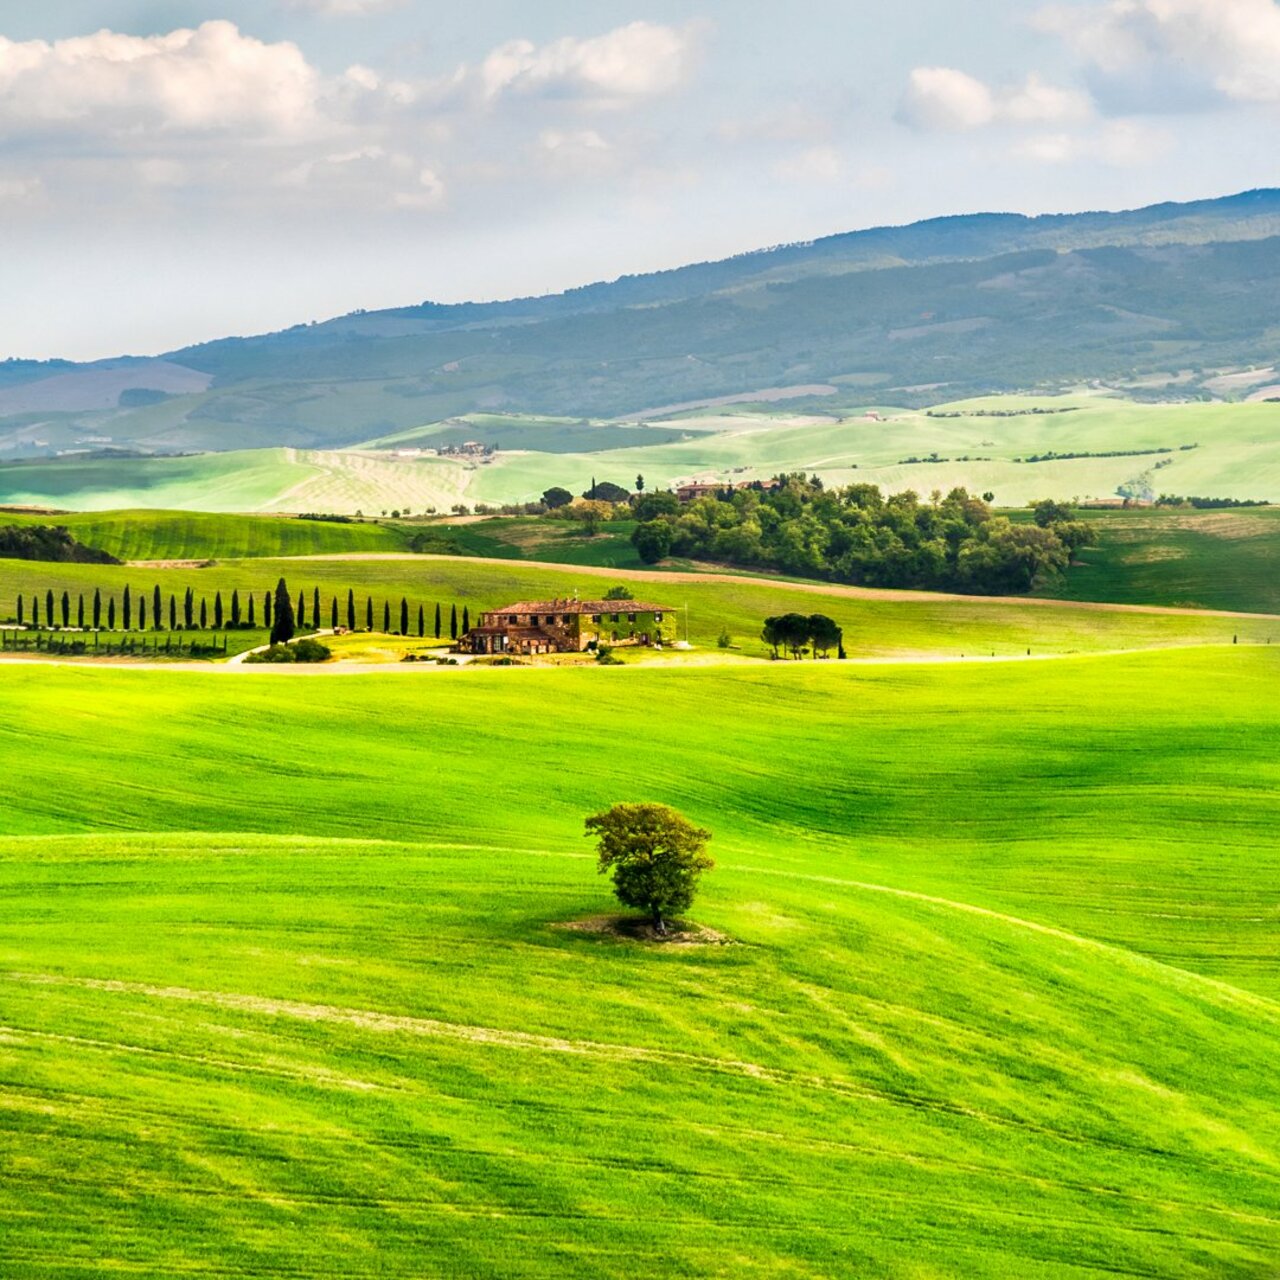 Tuscany, Italy <3So beautiful, who would you bring here?#italy #travel #tuscany https://t.co/JuC8mauL2s